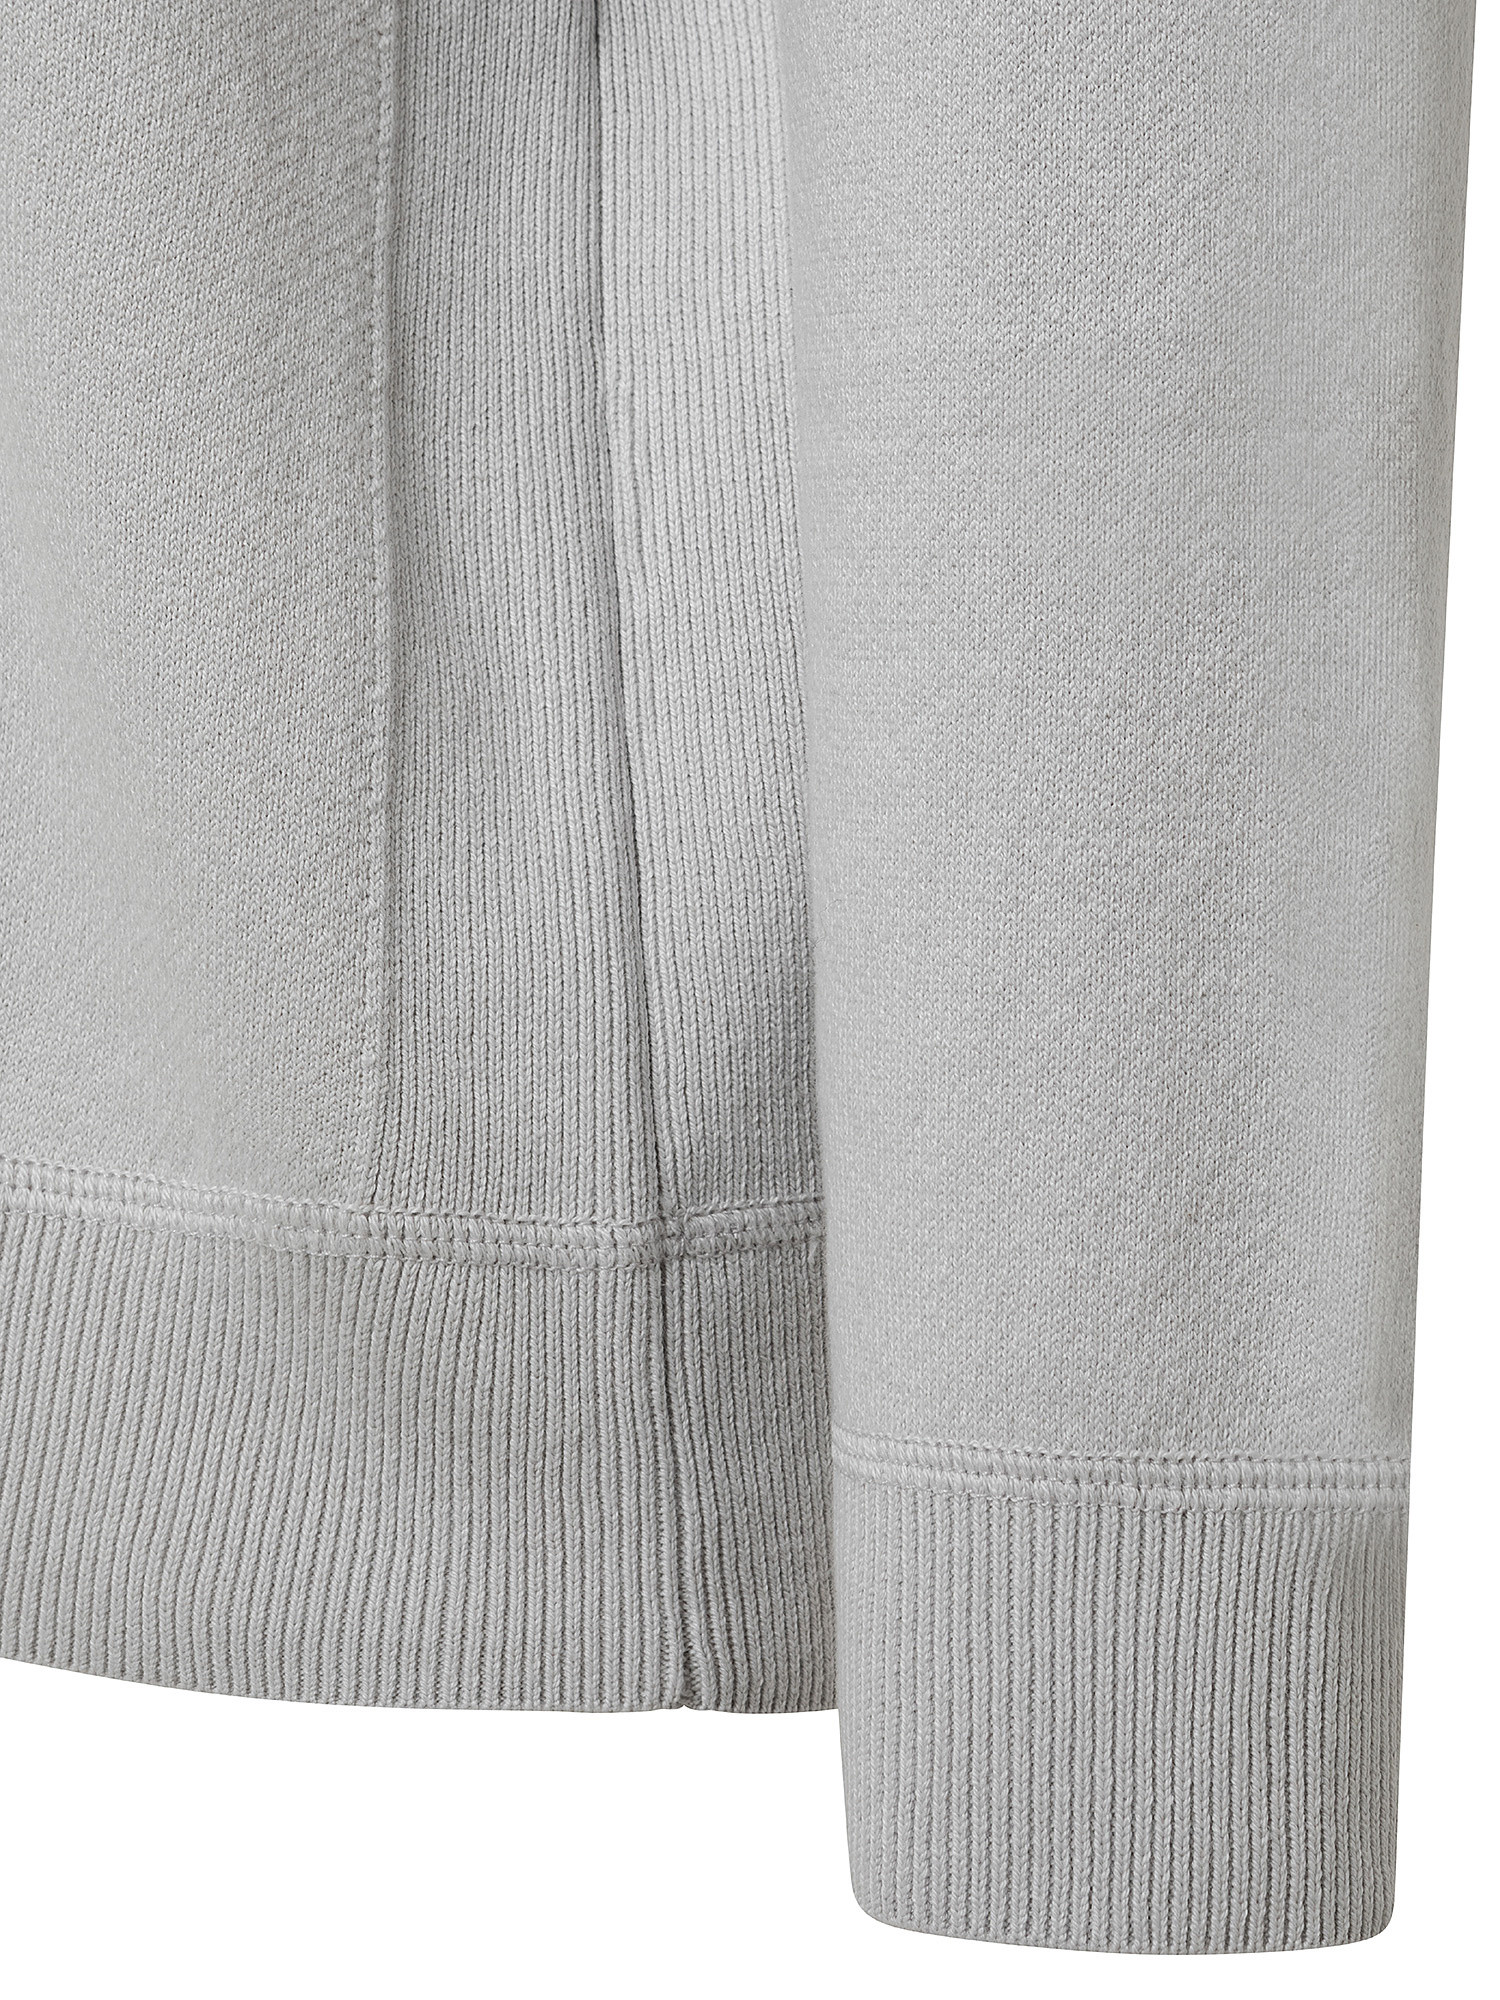 Hooded sweatshirt in cashmere knit, Ice White, large image number 2